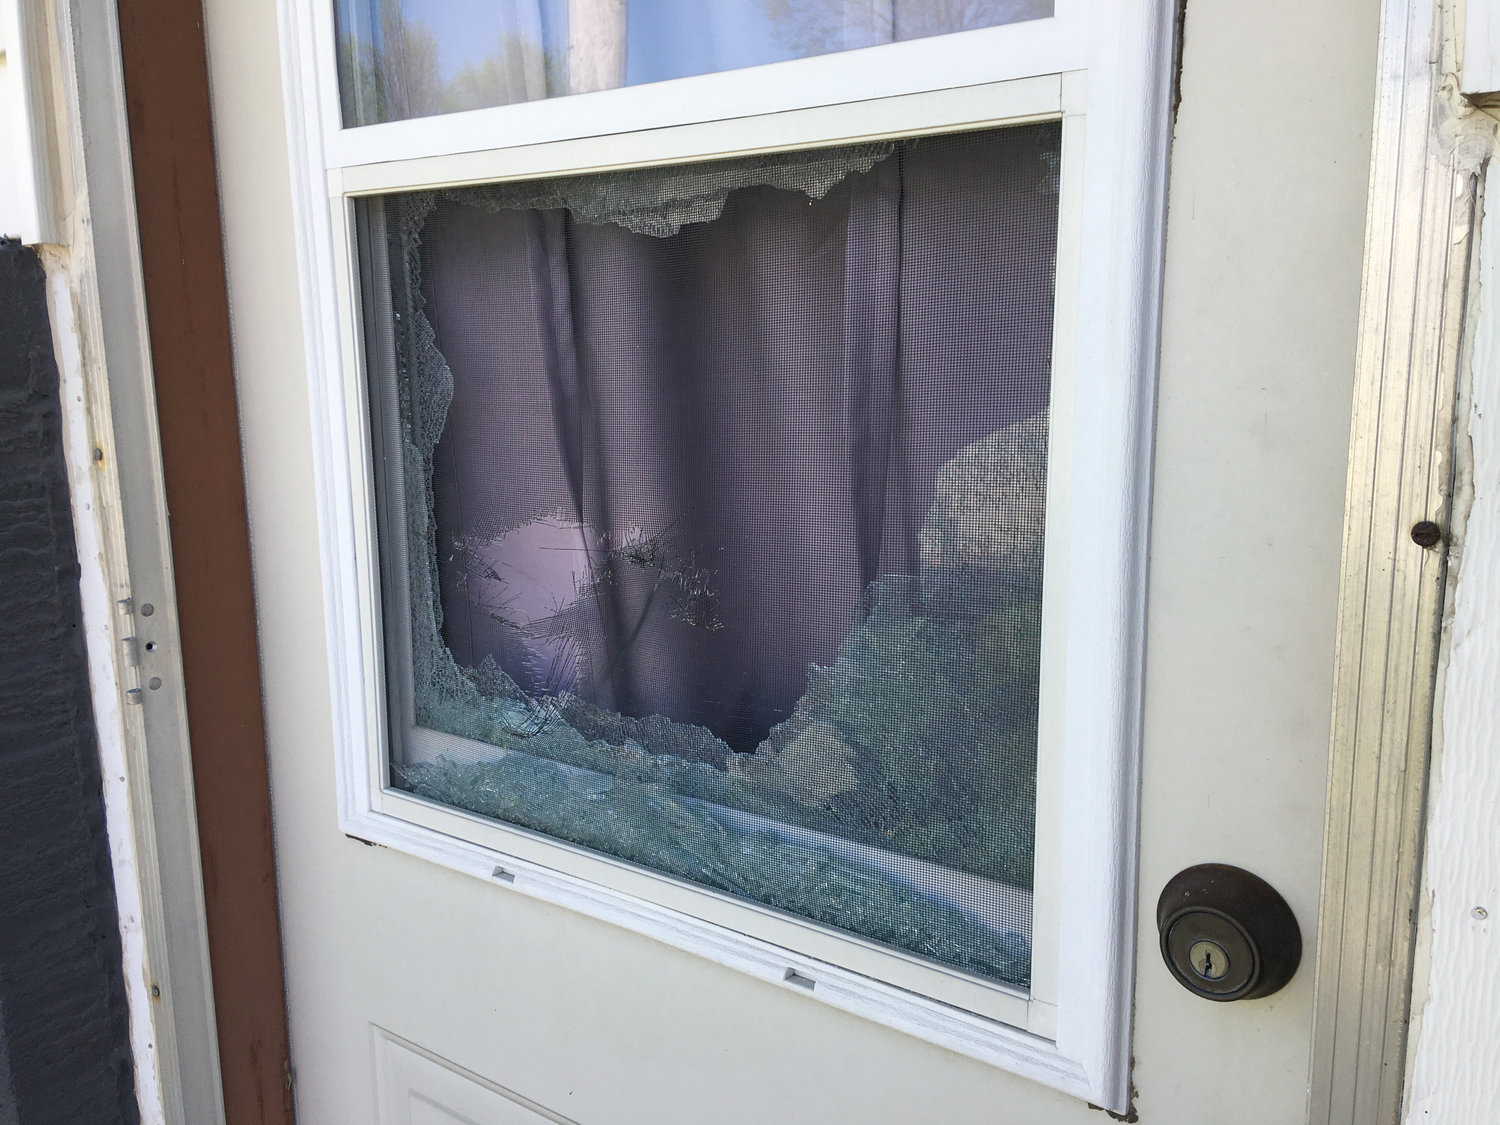 Salons broken into, owners irate